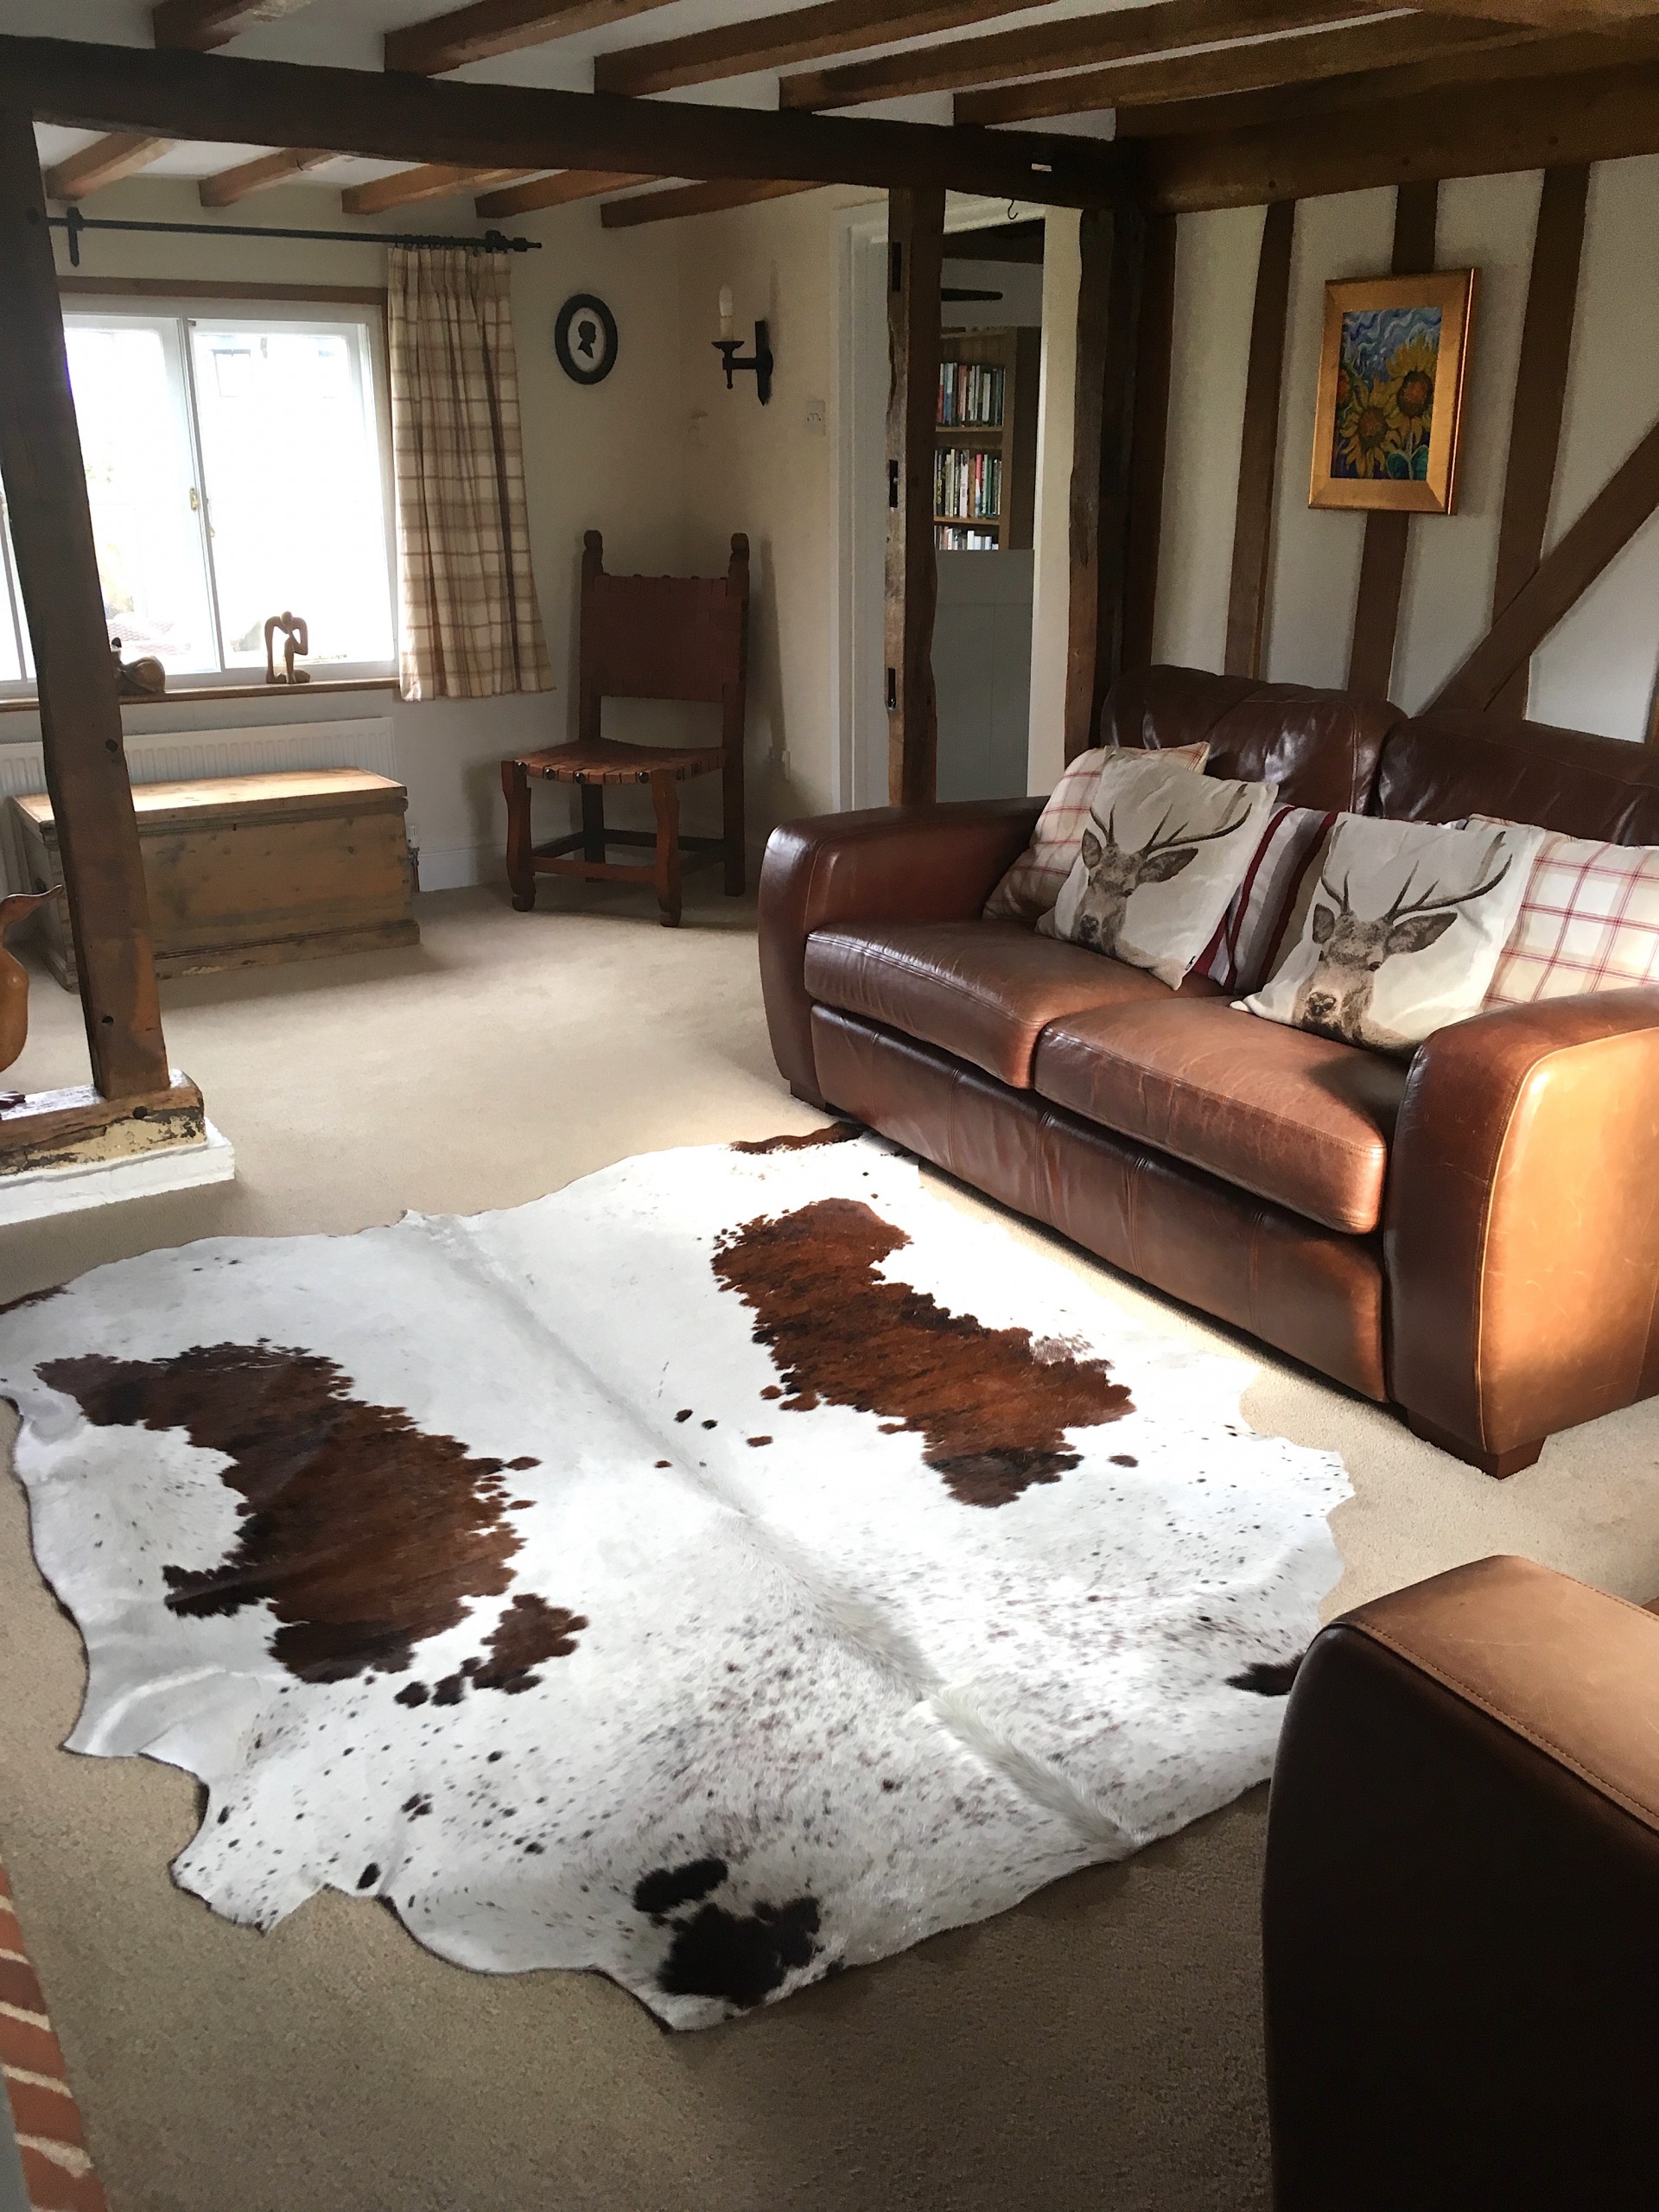 Nguni cowhide rugs, brown and white rugs, cowhides, skins, animal print, cowhide, luxury interiors, home interiors, interior styling, soft furnishings, sustainable, living room decor, floor art